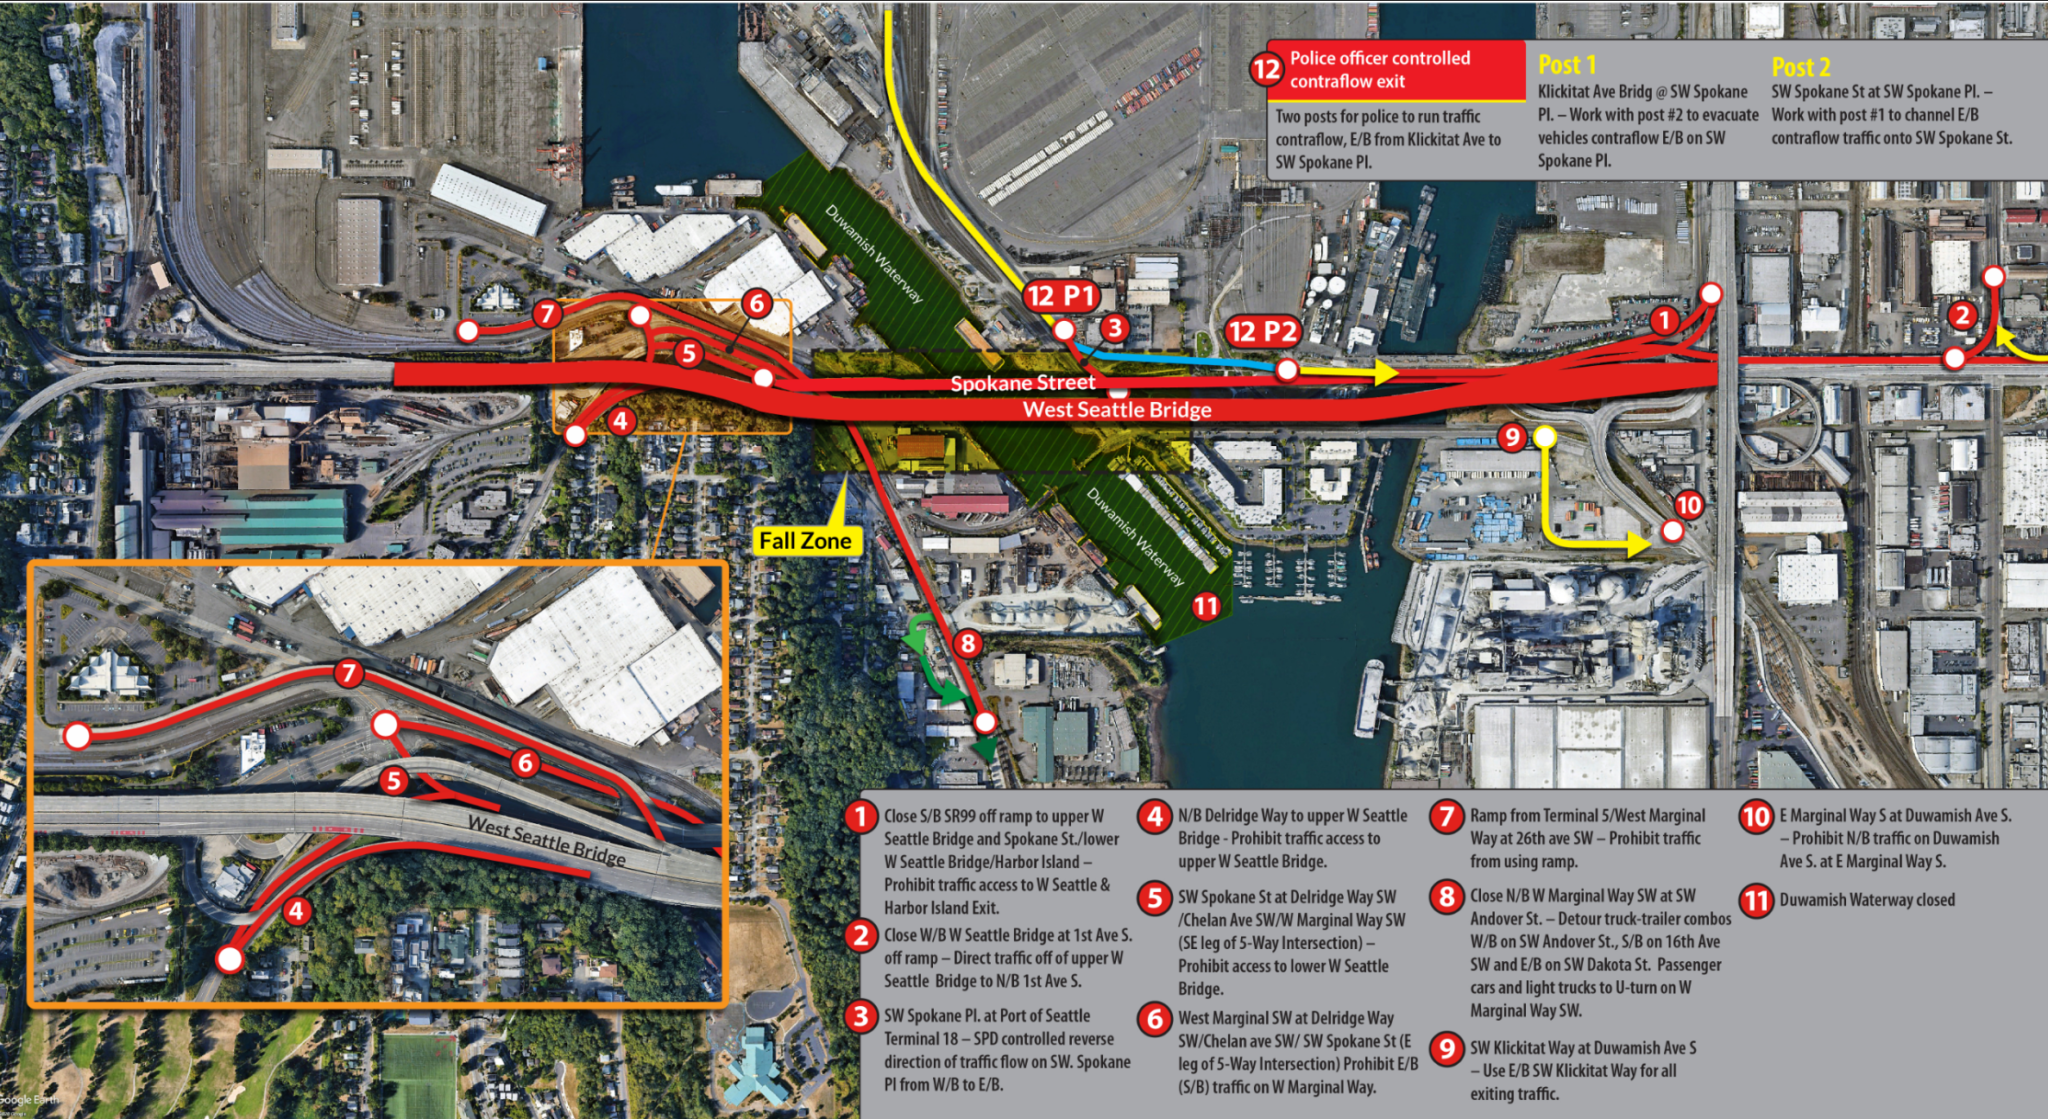 More information for the potential fall zones on the West Seattle Bridge.